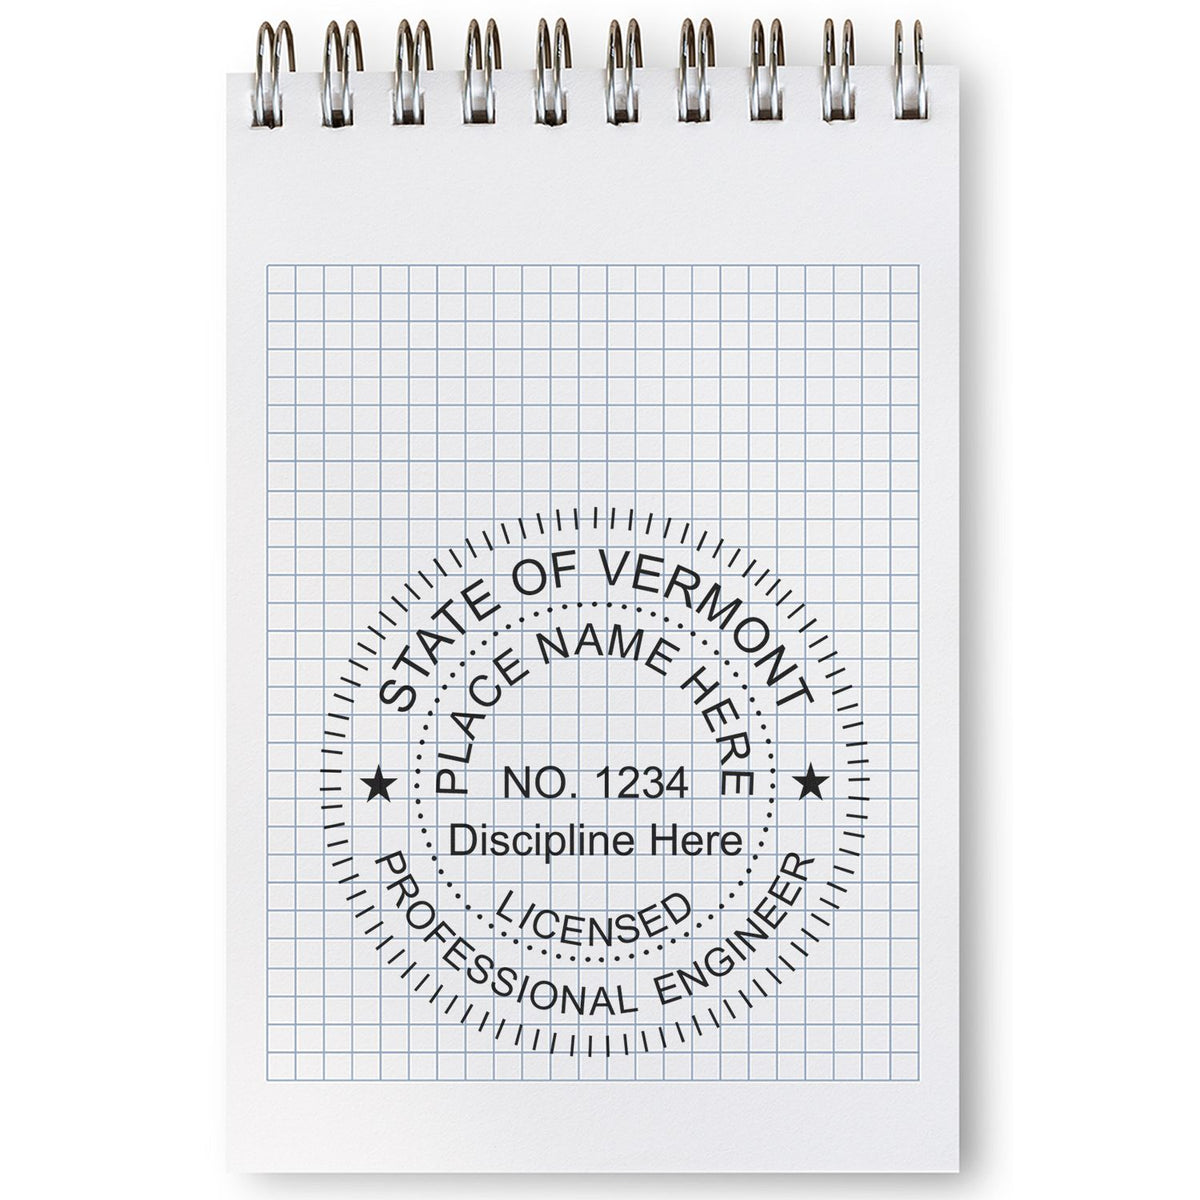 Another Example of a stamped impression of the Vermont Professional Engineer Seal Stamp on a piece of office paper.